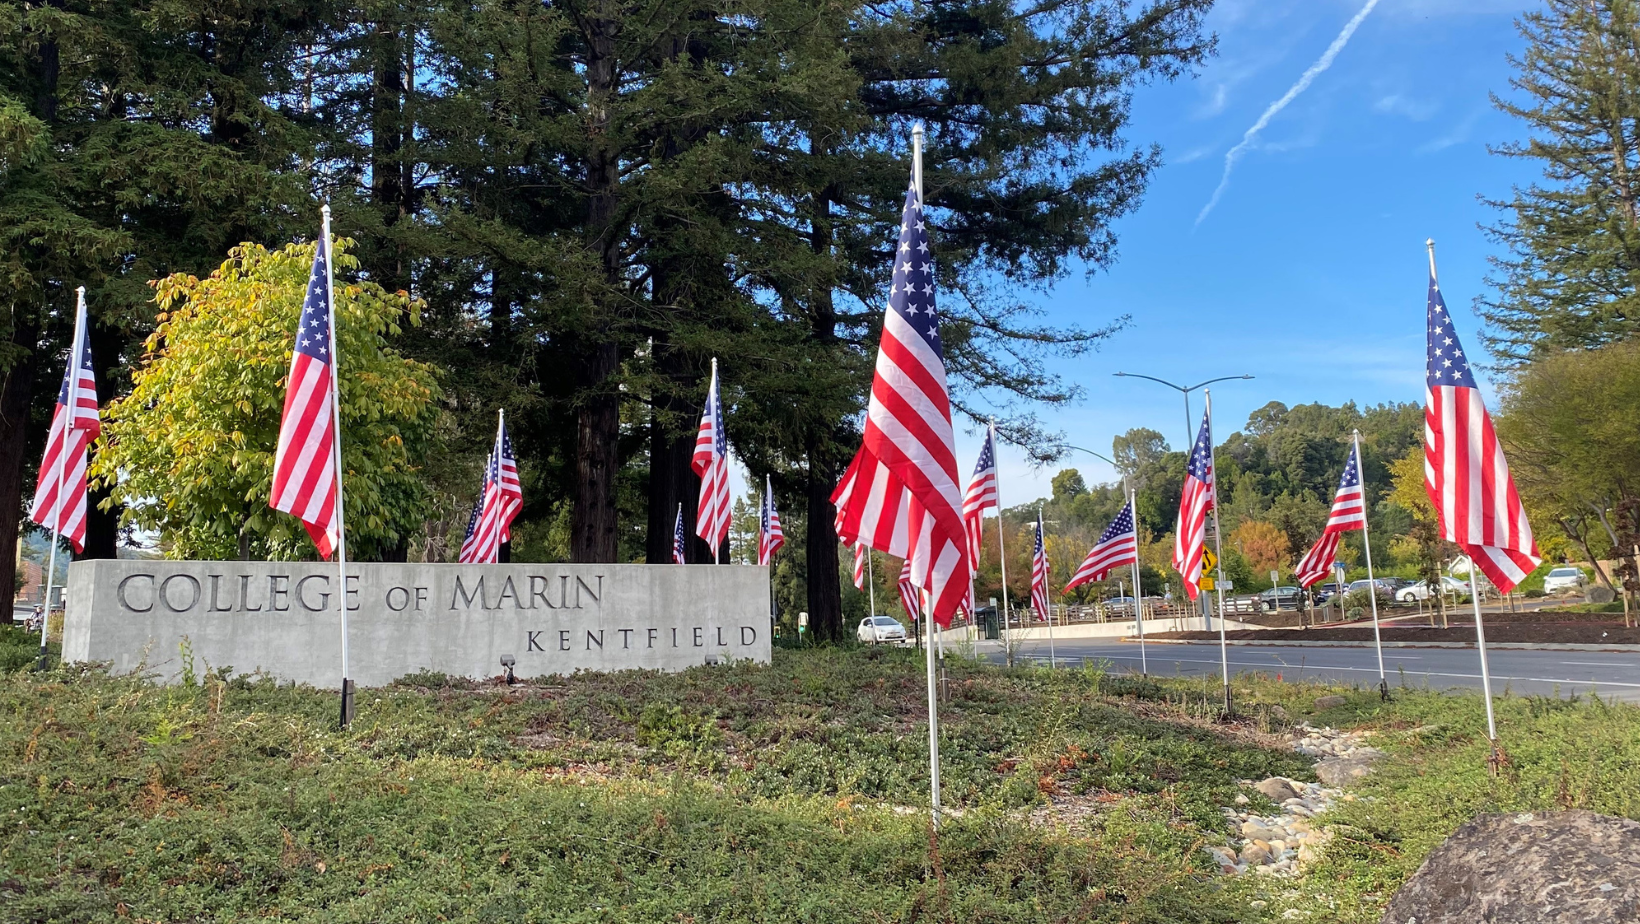 U.S. flags posted in the ground with buildings and trees in the background.